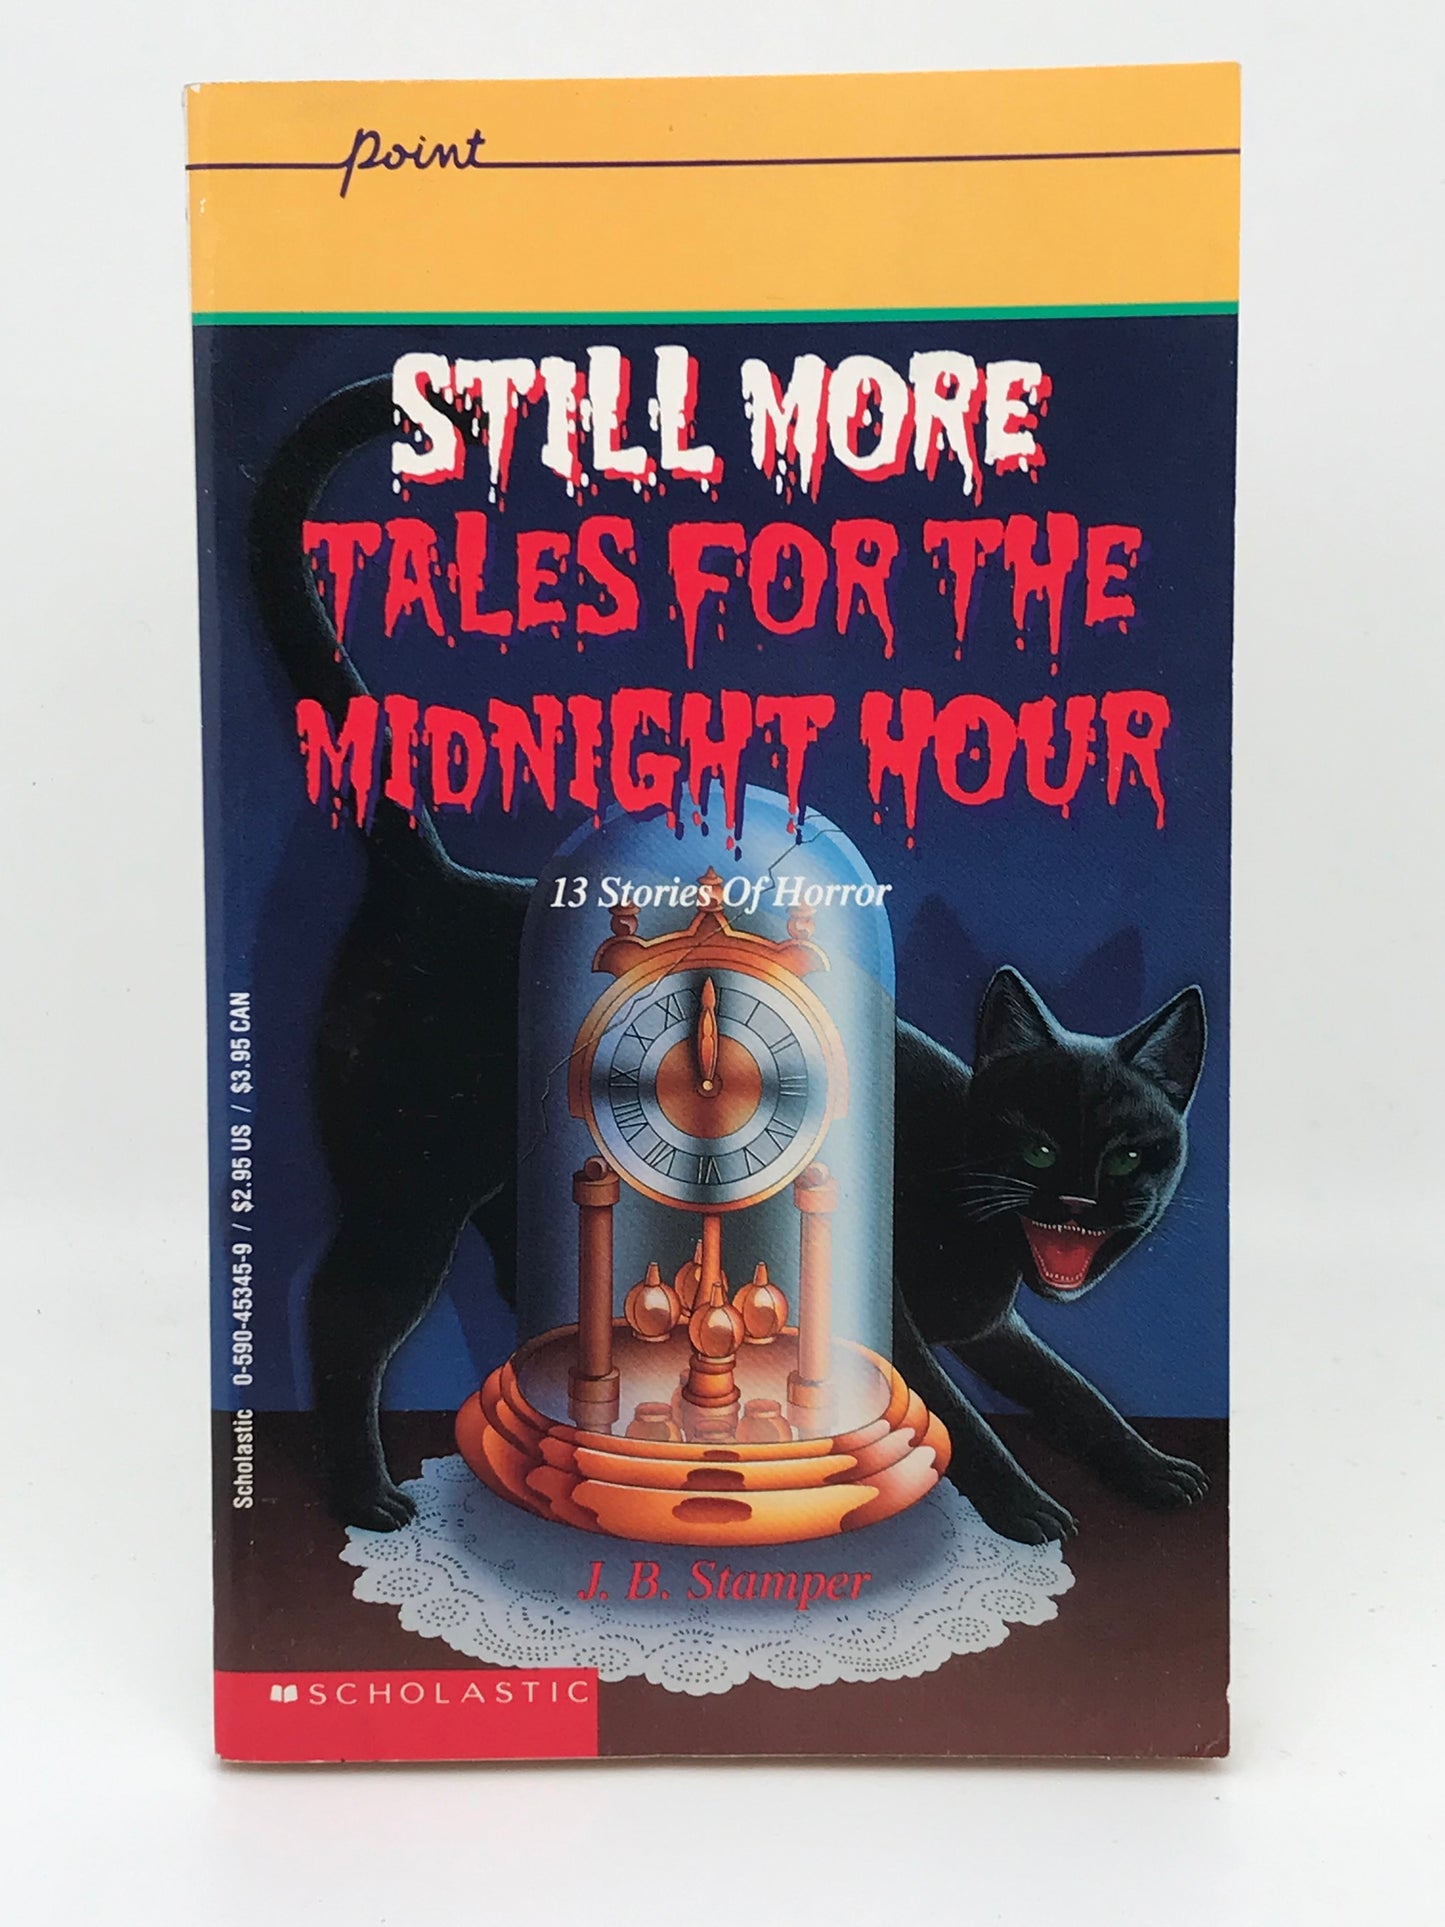 Still More Tales For The Midnight Hour POINT/SCHOLASTIC Paperback ACH01